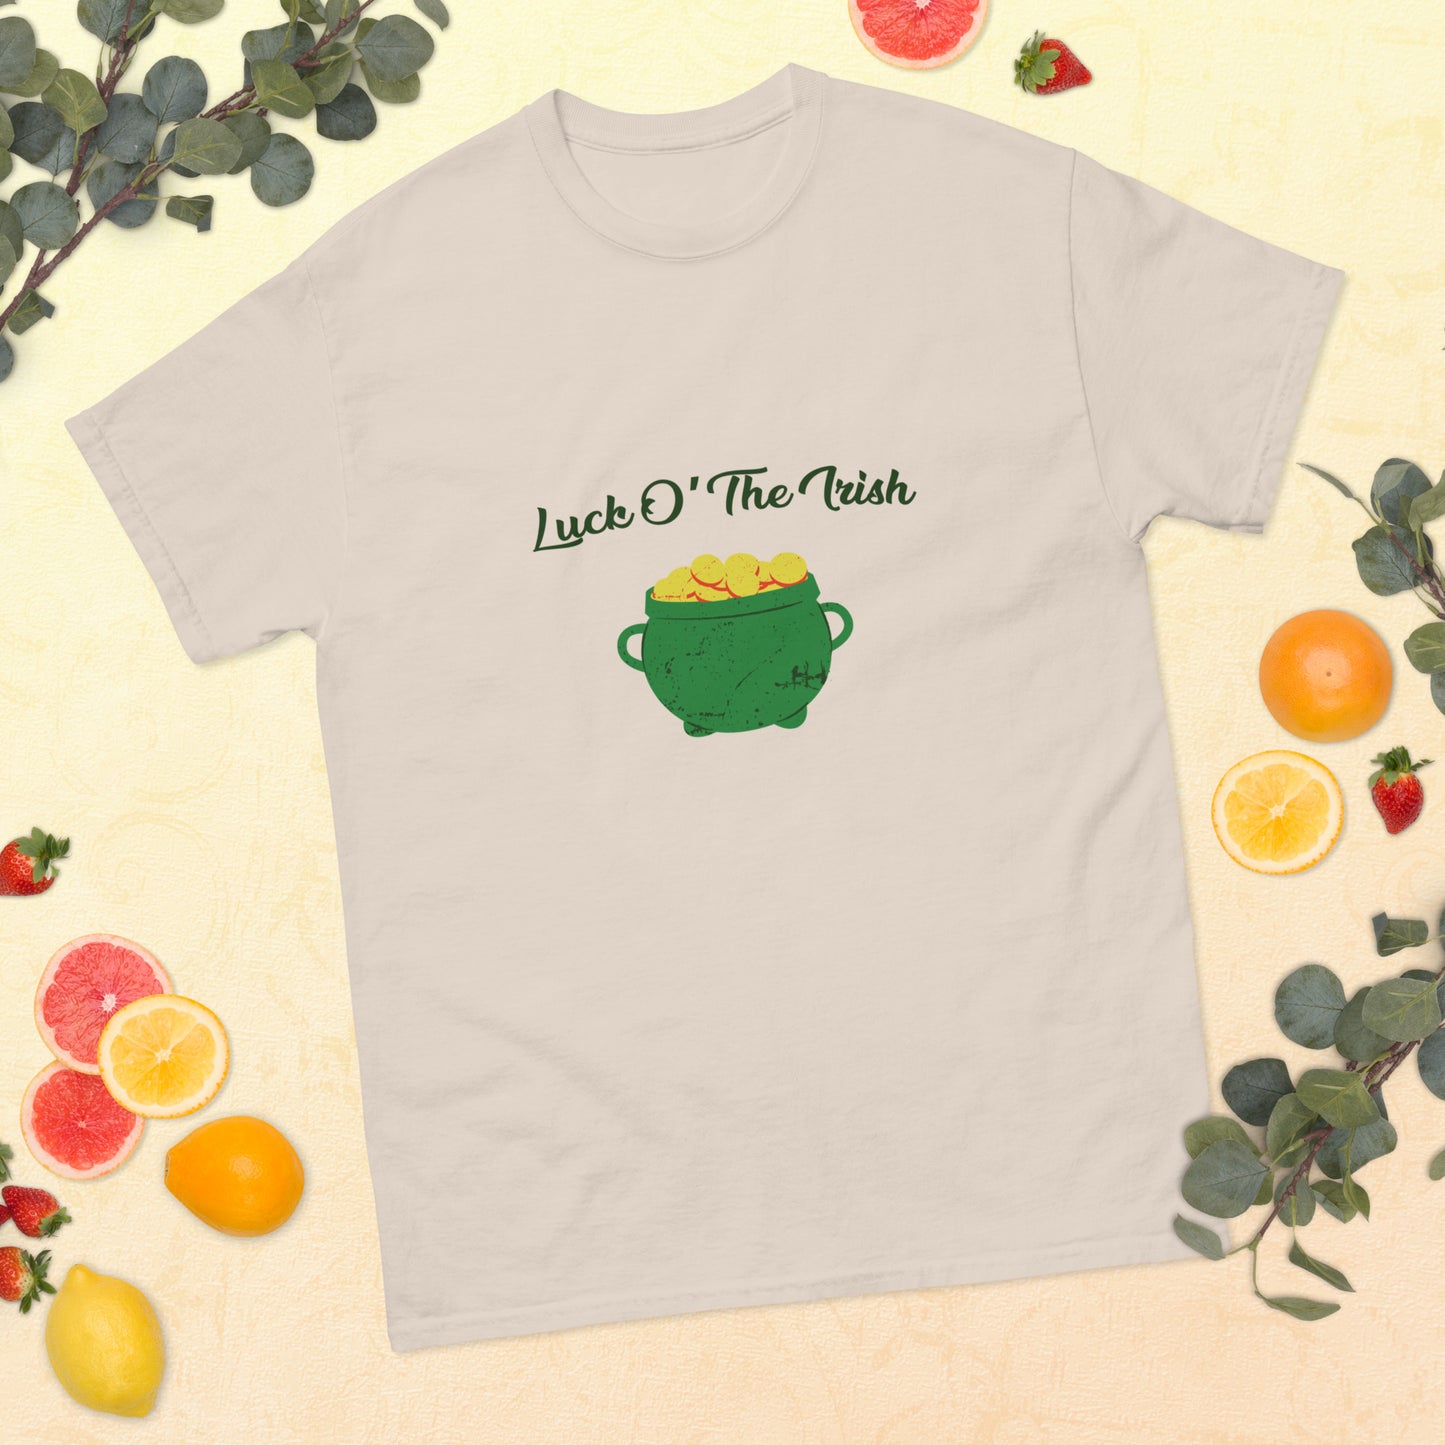 "Luck O’ The Irish" men's t-shirt with taped neck and shoulders